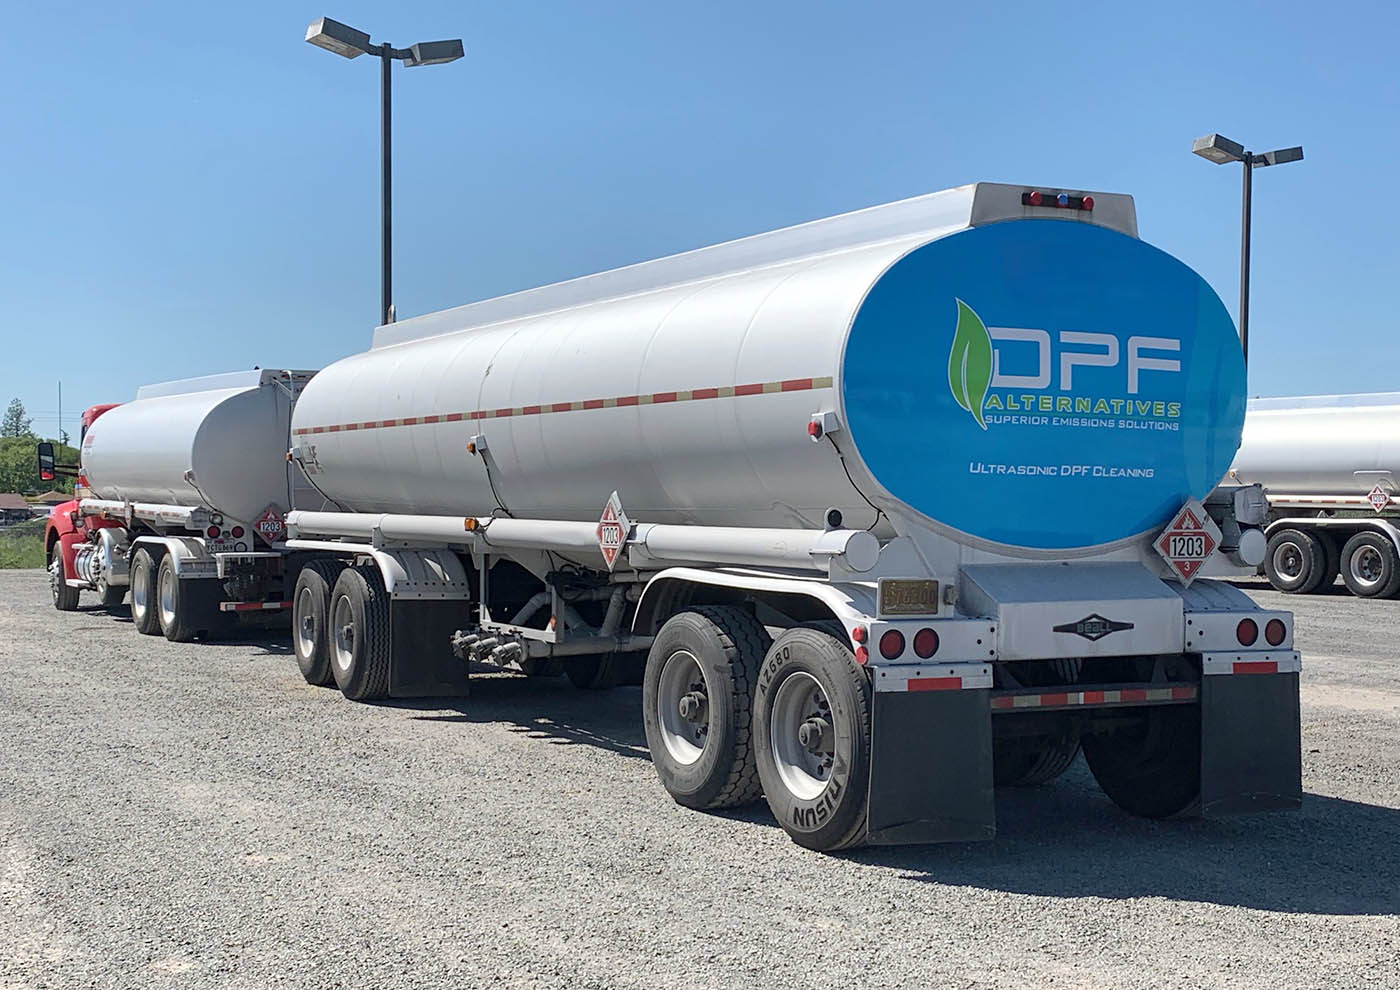 Back of a clean, large, reflective semi truck rig, contact DPF Alternatives for a DPF cleaning in Utah County.